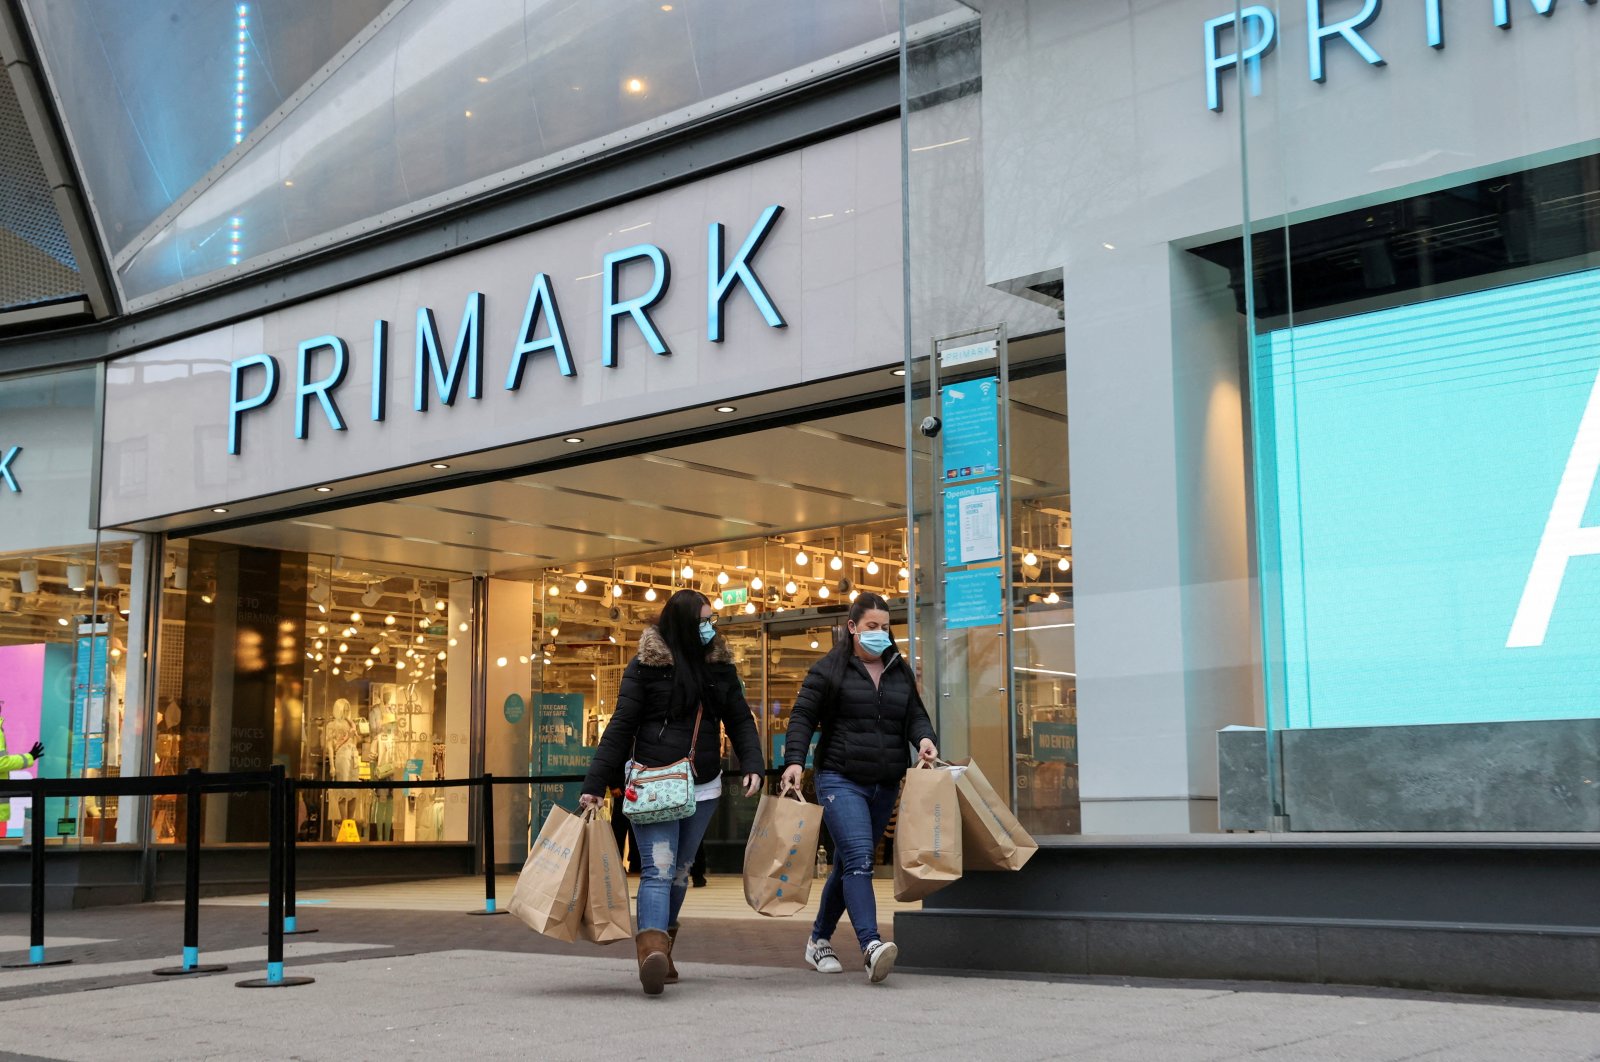 Customers walk with shopping bags, close to retail store Primark in Birmingham, U.K., April 12, 2021. (Reuters Photo)